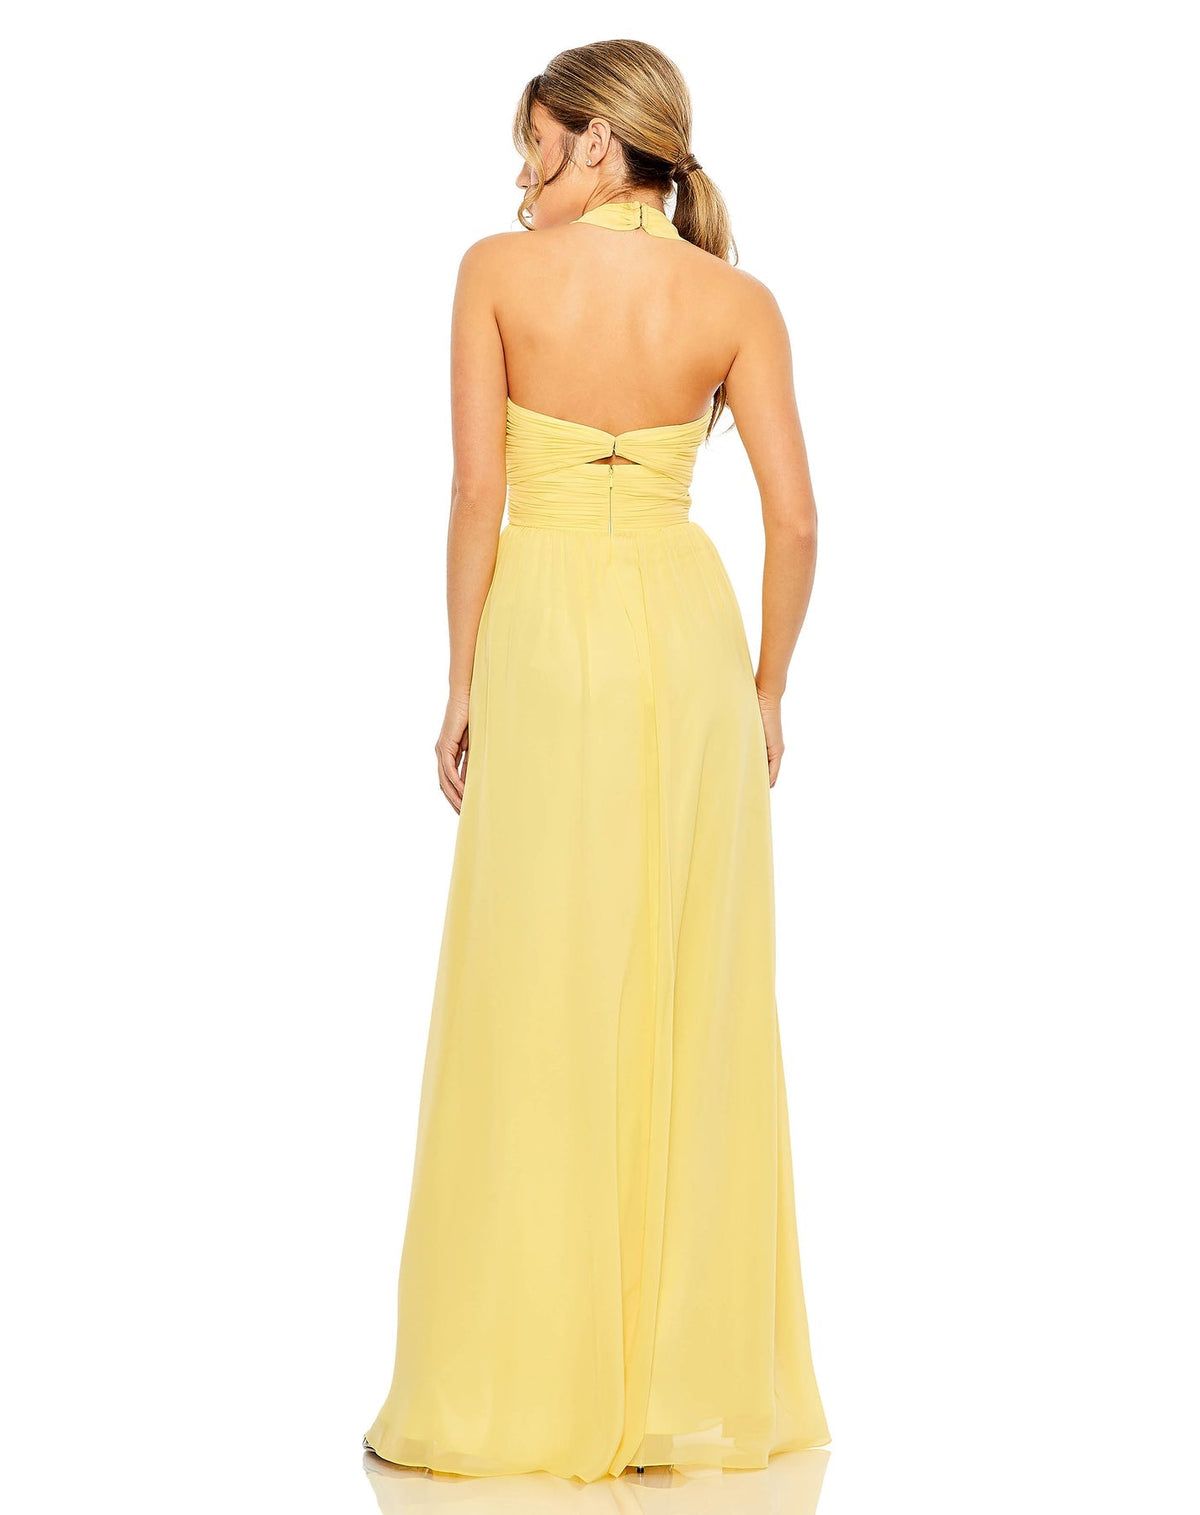 RUCHED HALTER STRAP KEYHOLE CHIFFON GOWN sunshine yellow back